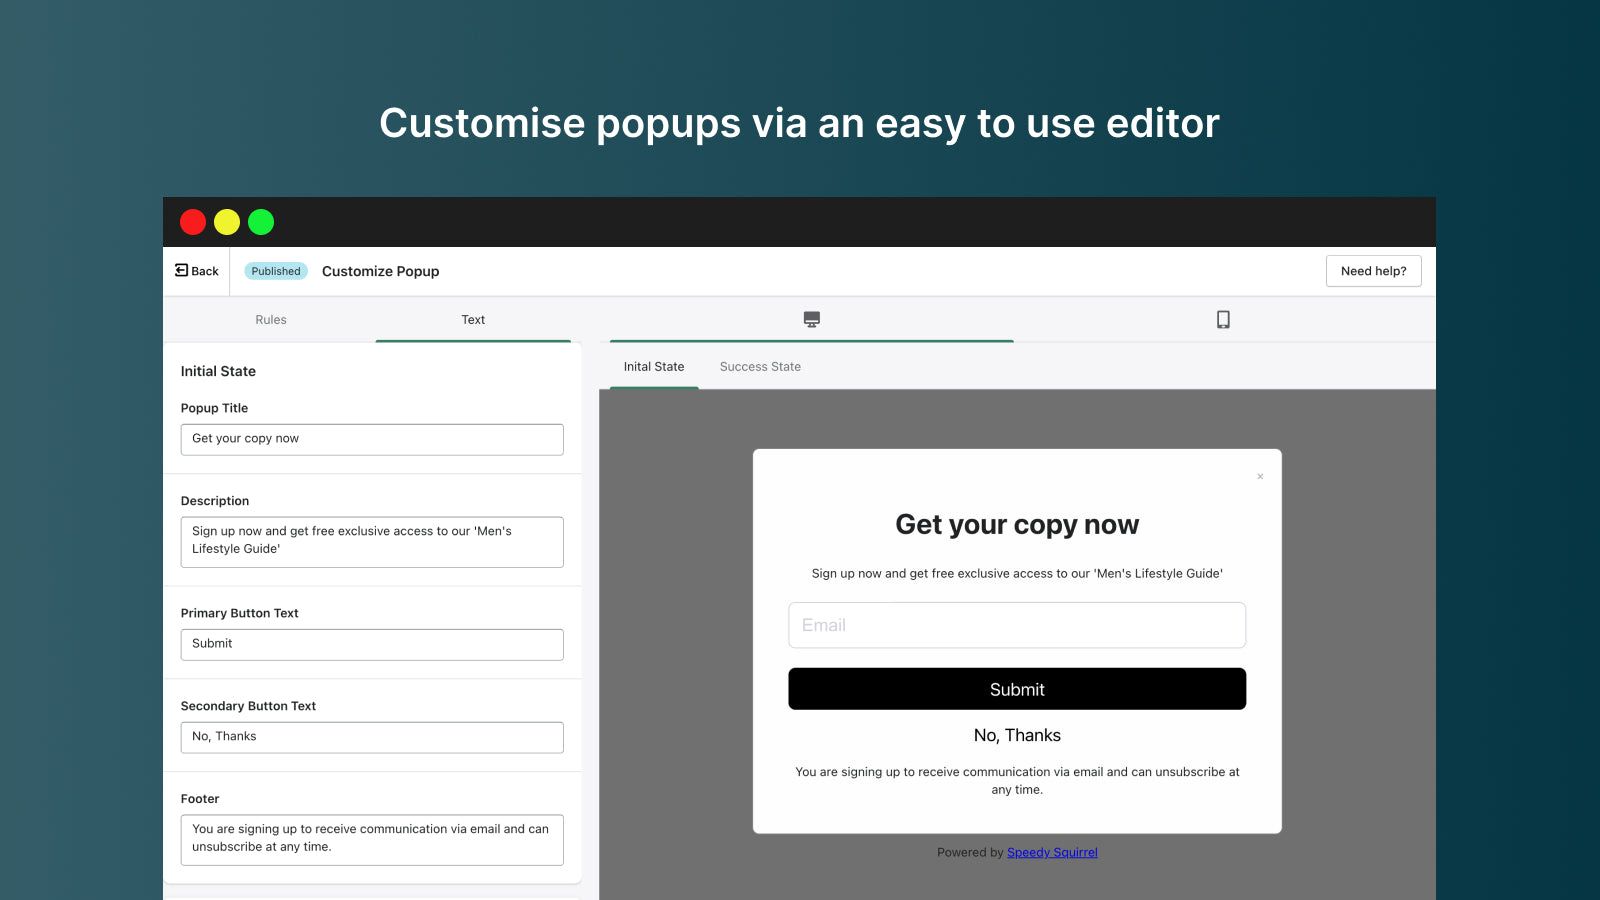 Customise popup via a user friendly visual editor